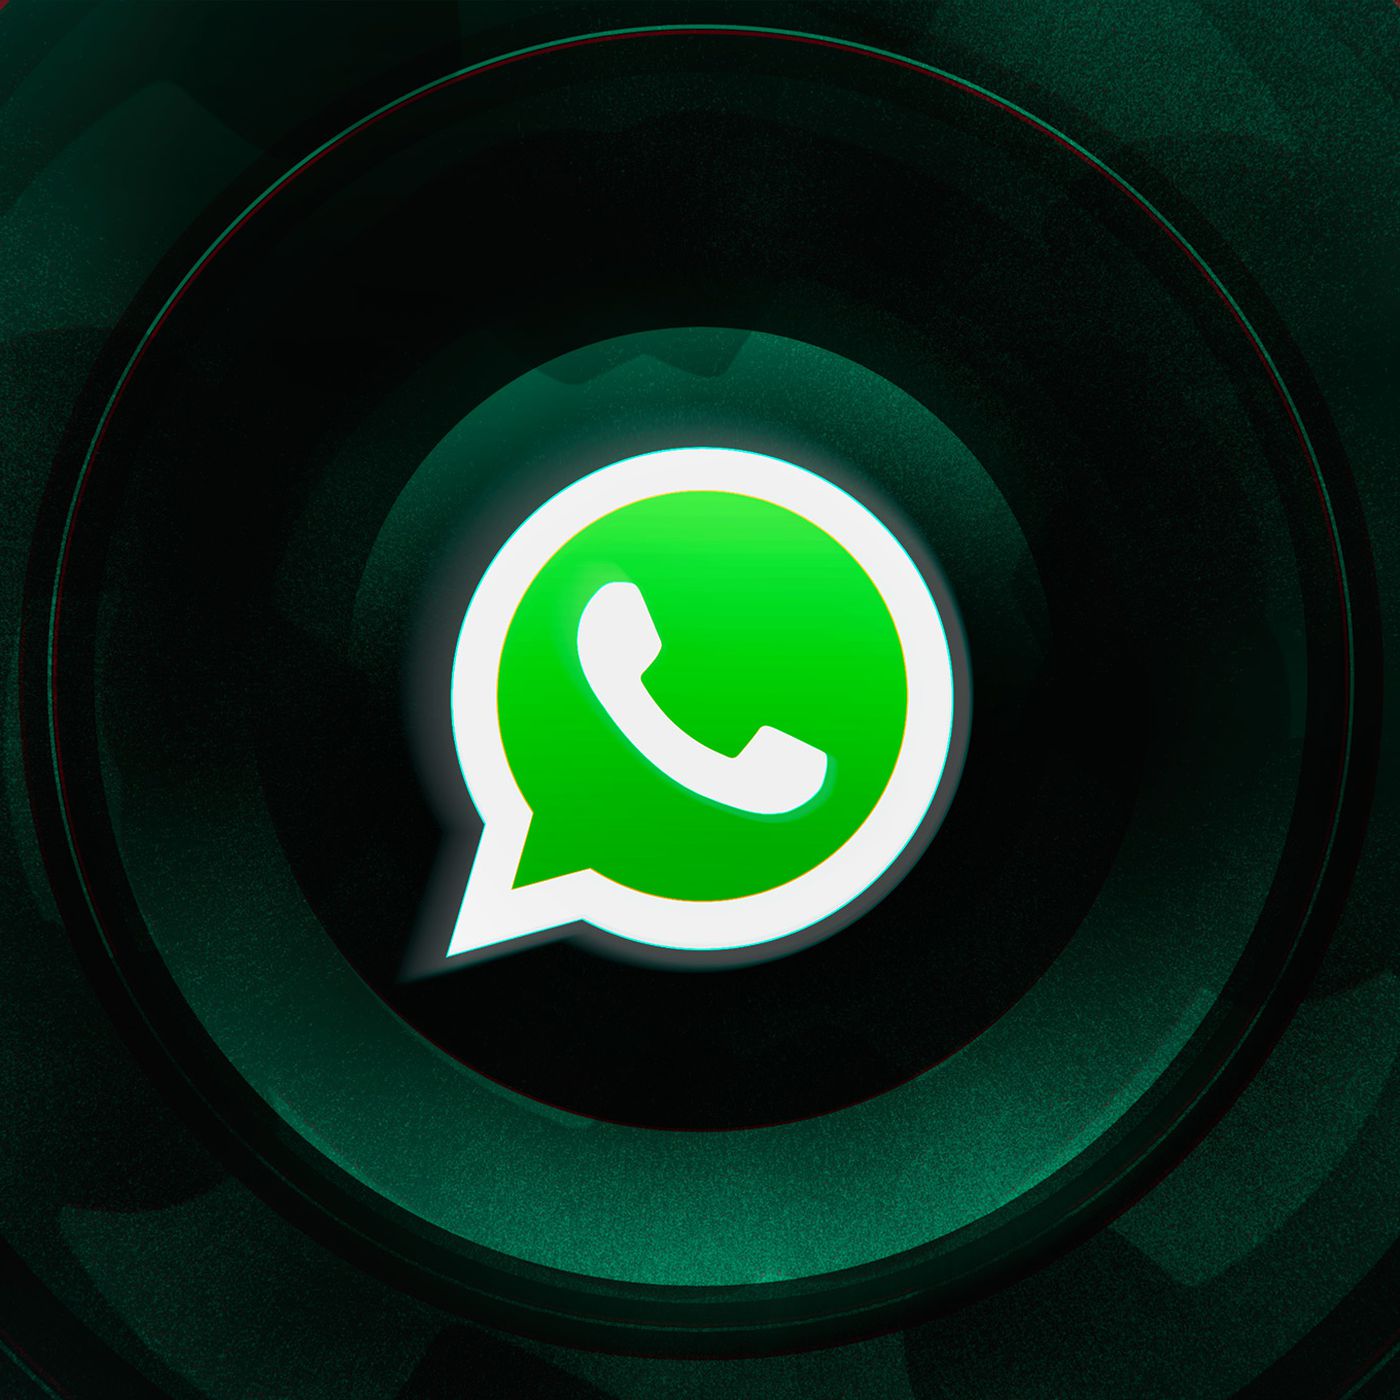 WhatsApp explains what happens if you don't accept its new privacy policy -  The Verge